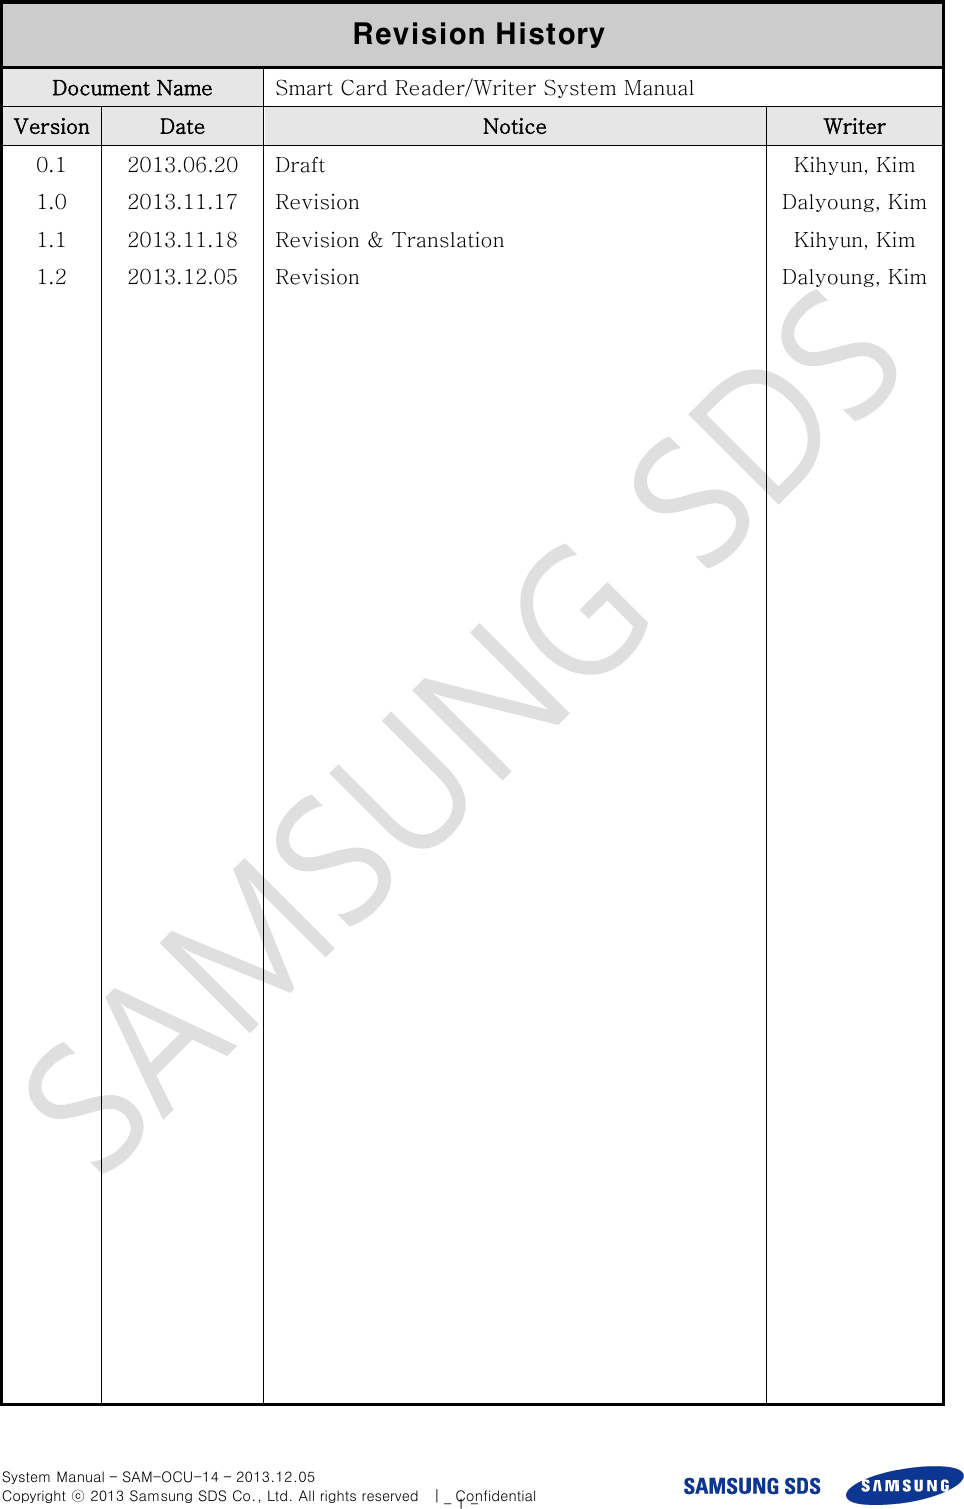  System Manual – SAM-OCU-14 – 2013.12.05 Copyright ⓒ 2013 Samsung SDS Co., Ltd. All rights reserved    |    Confidential - 1 -    Revision History Document Name Smart Card Reader/Writer System Manual Version Date Notice Writer 0.1 1.0 1.1 1.2 2013.06.20 2013.11.17 2013.11.18 2013.12.05 Draft Revision Revision &amp; Translation Revision Kihyun, Kim Dalyoung, Kim Kihyun, Kim Dalyoung, Kim   